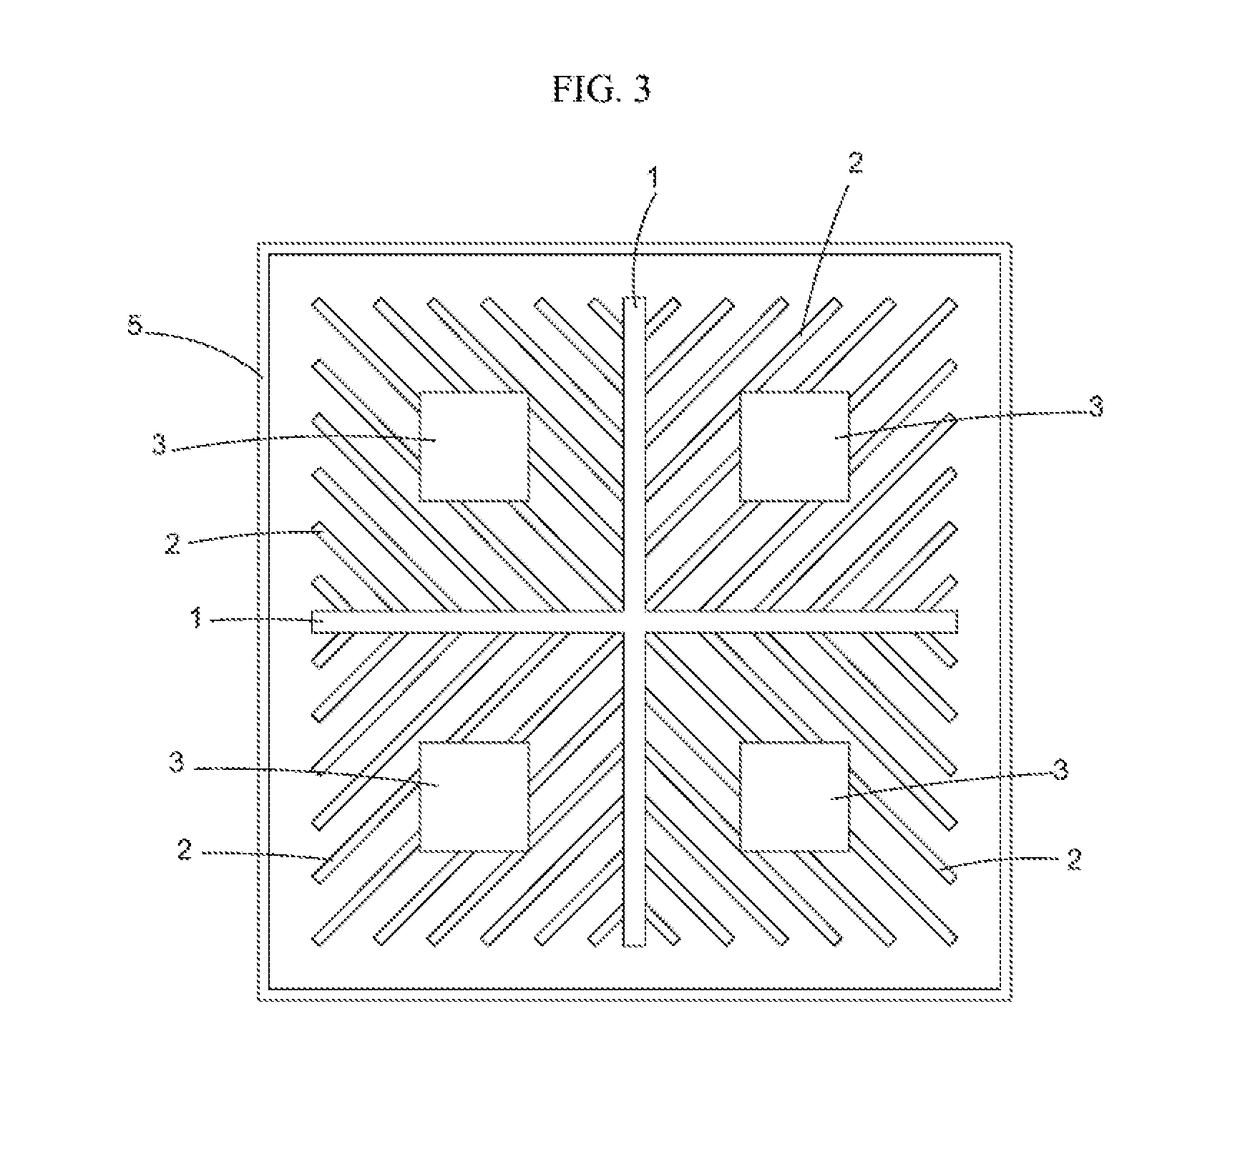 Pixel electrode and array substrate